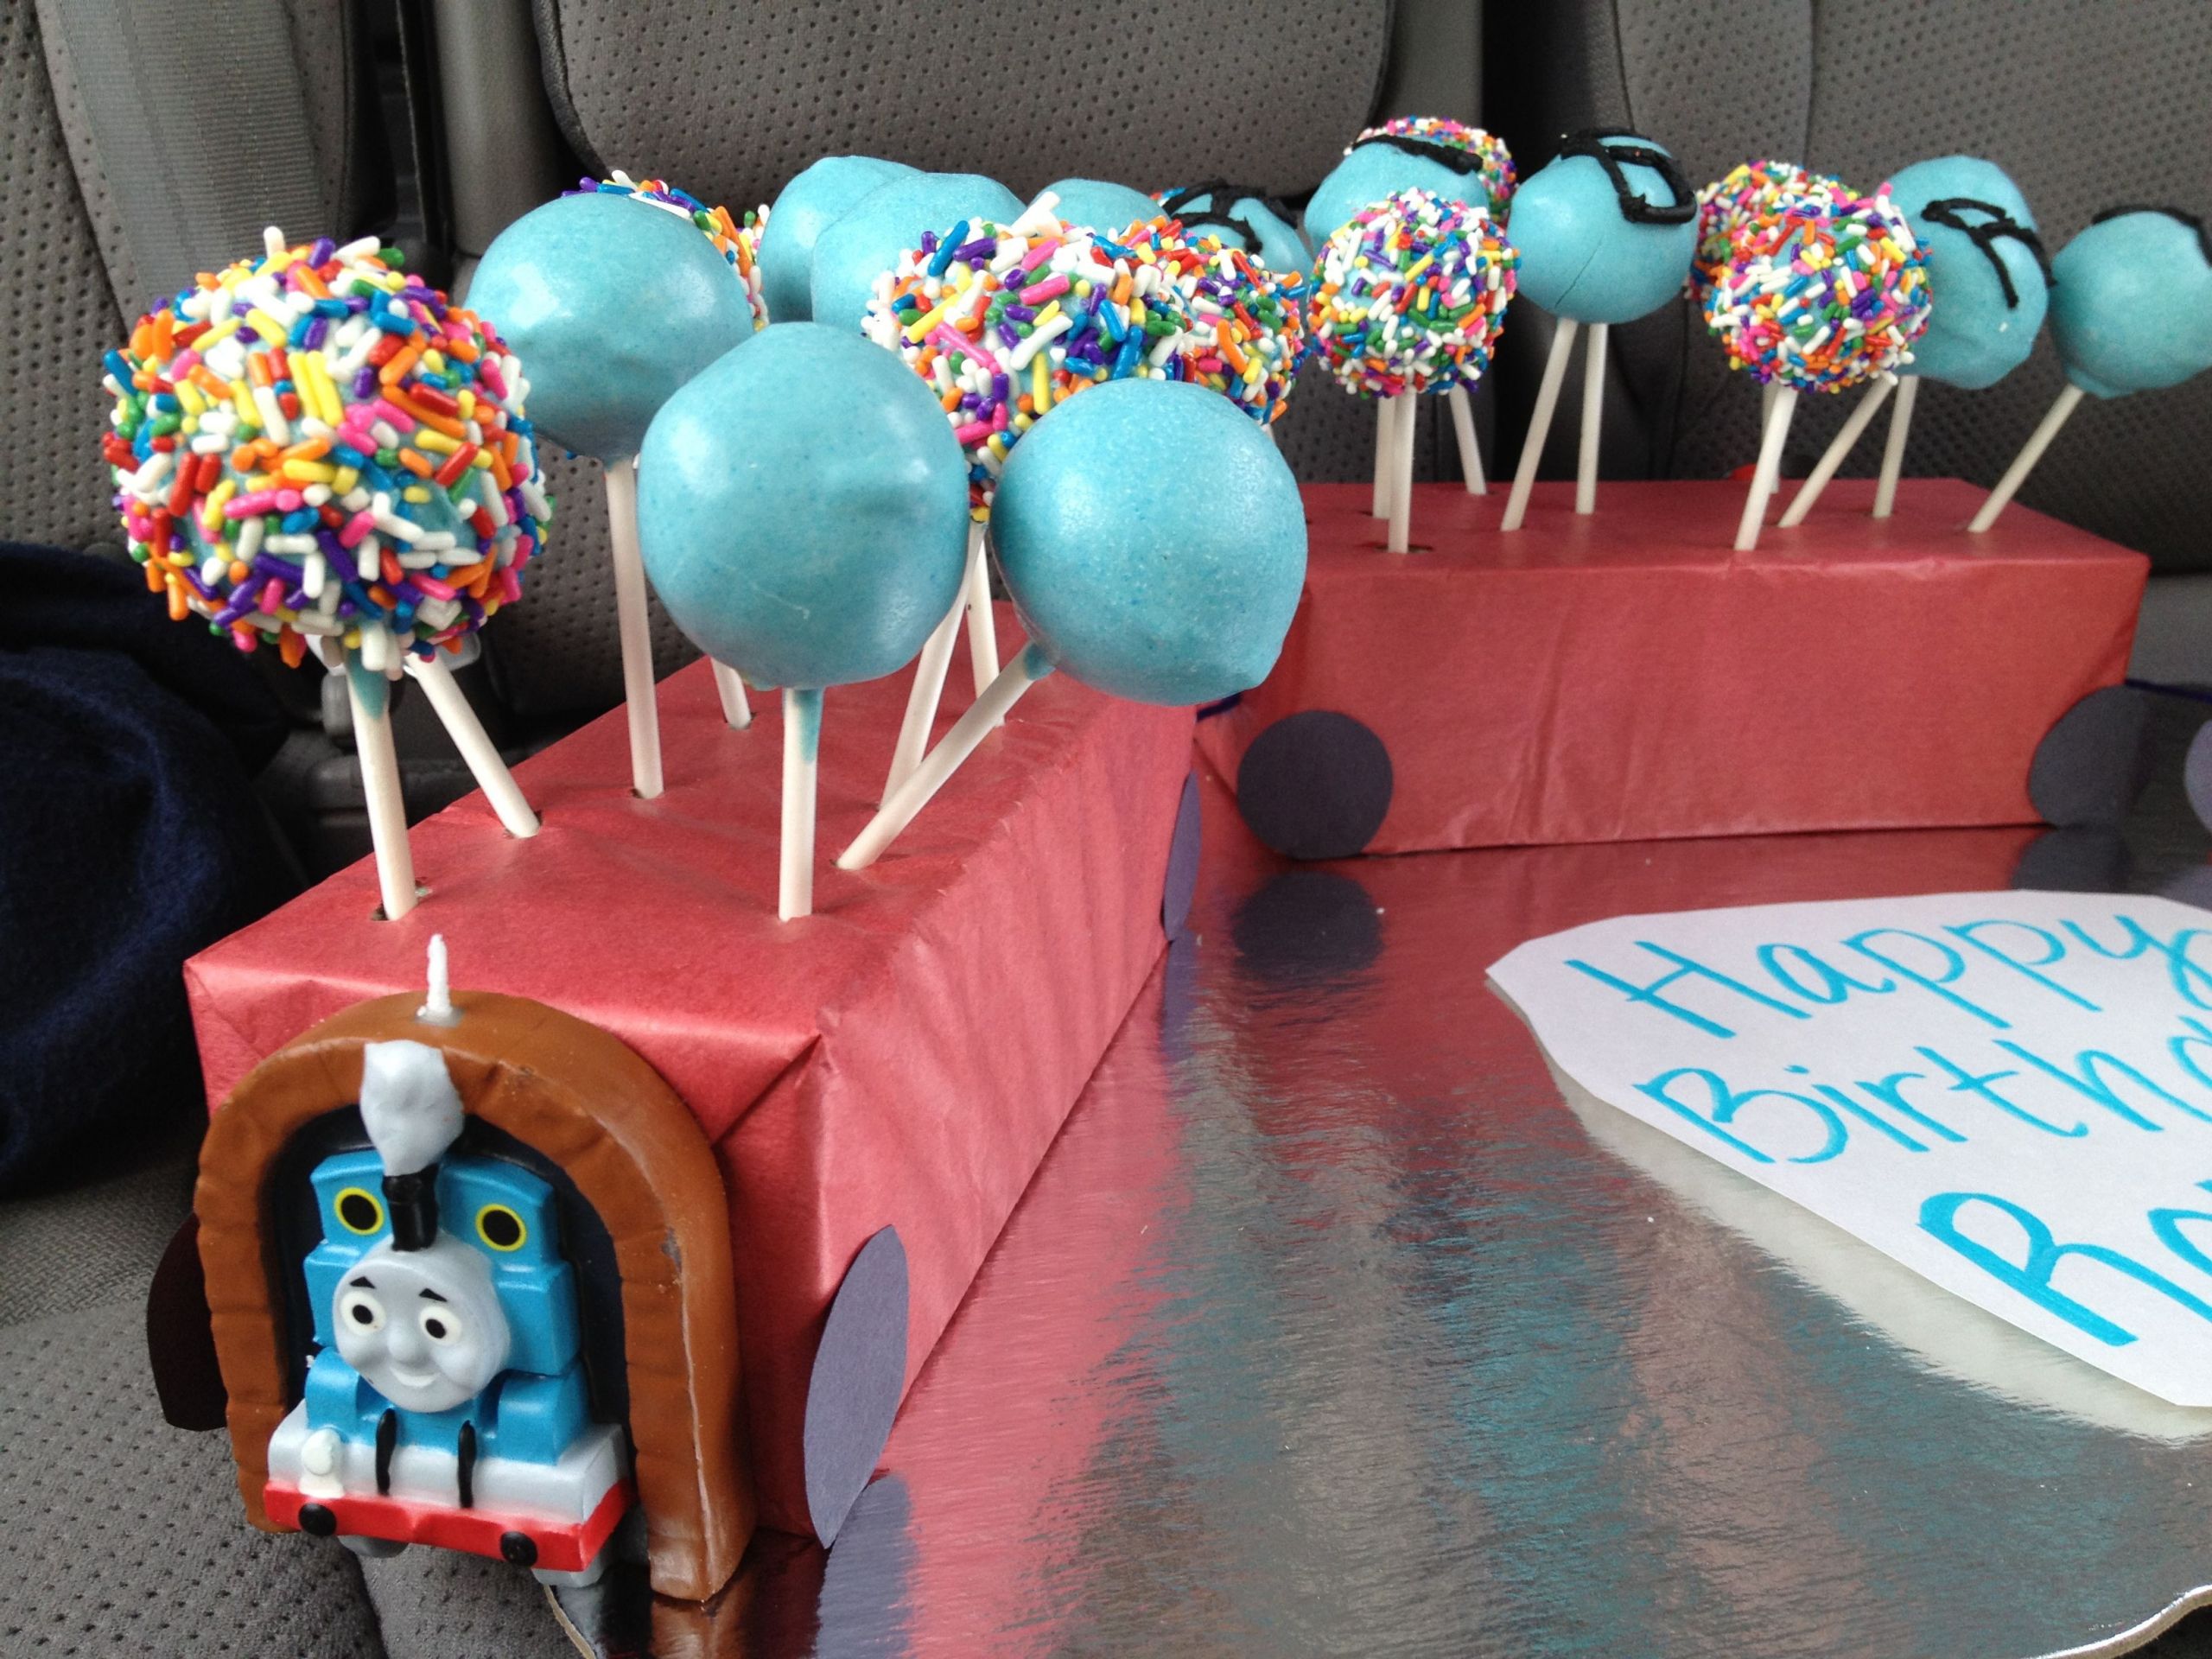 Summer Birthday Party Ideas For 4 Year Old Boy
 Cake Pops for 4 year old boy s birthday